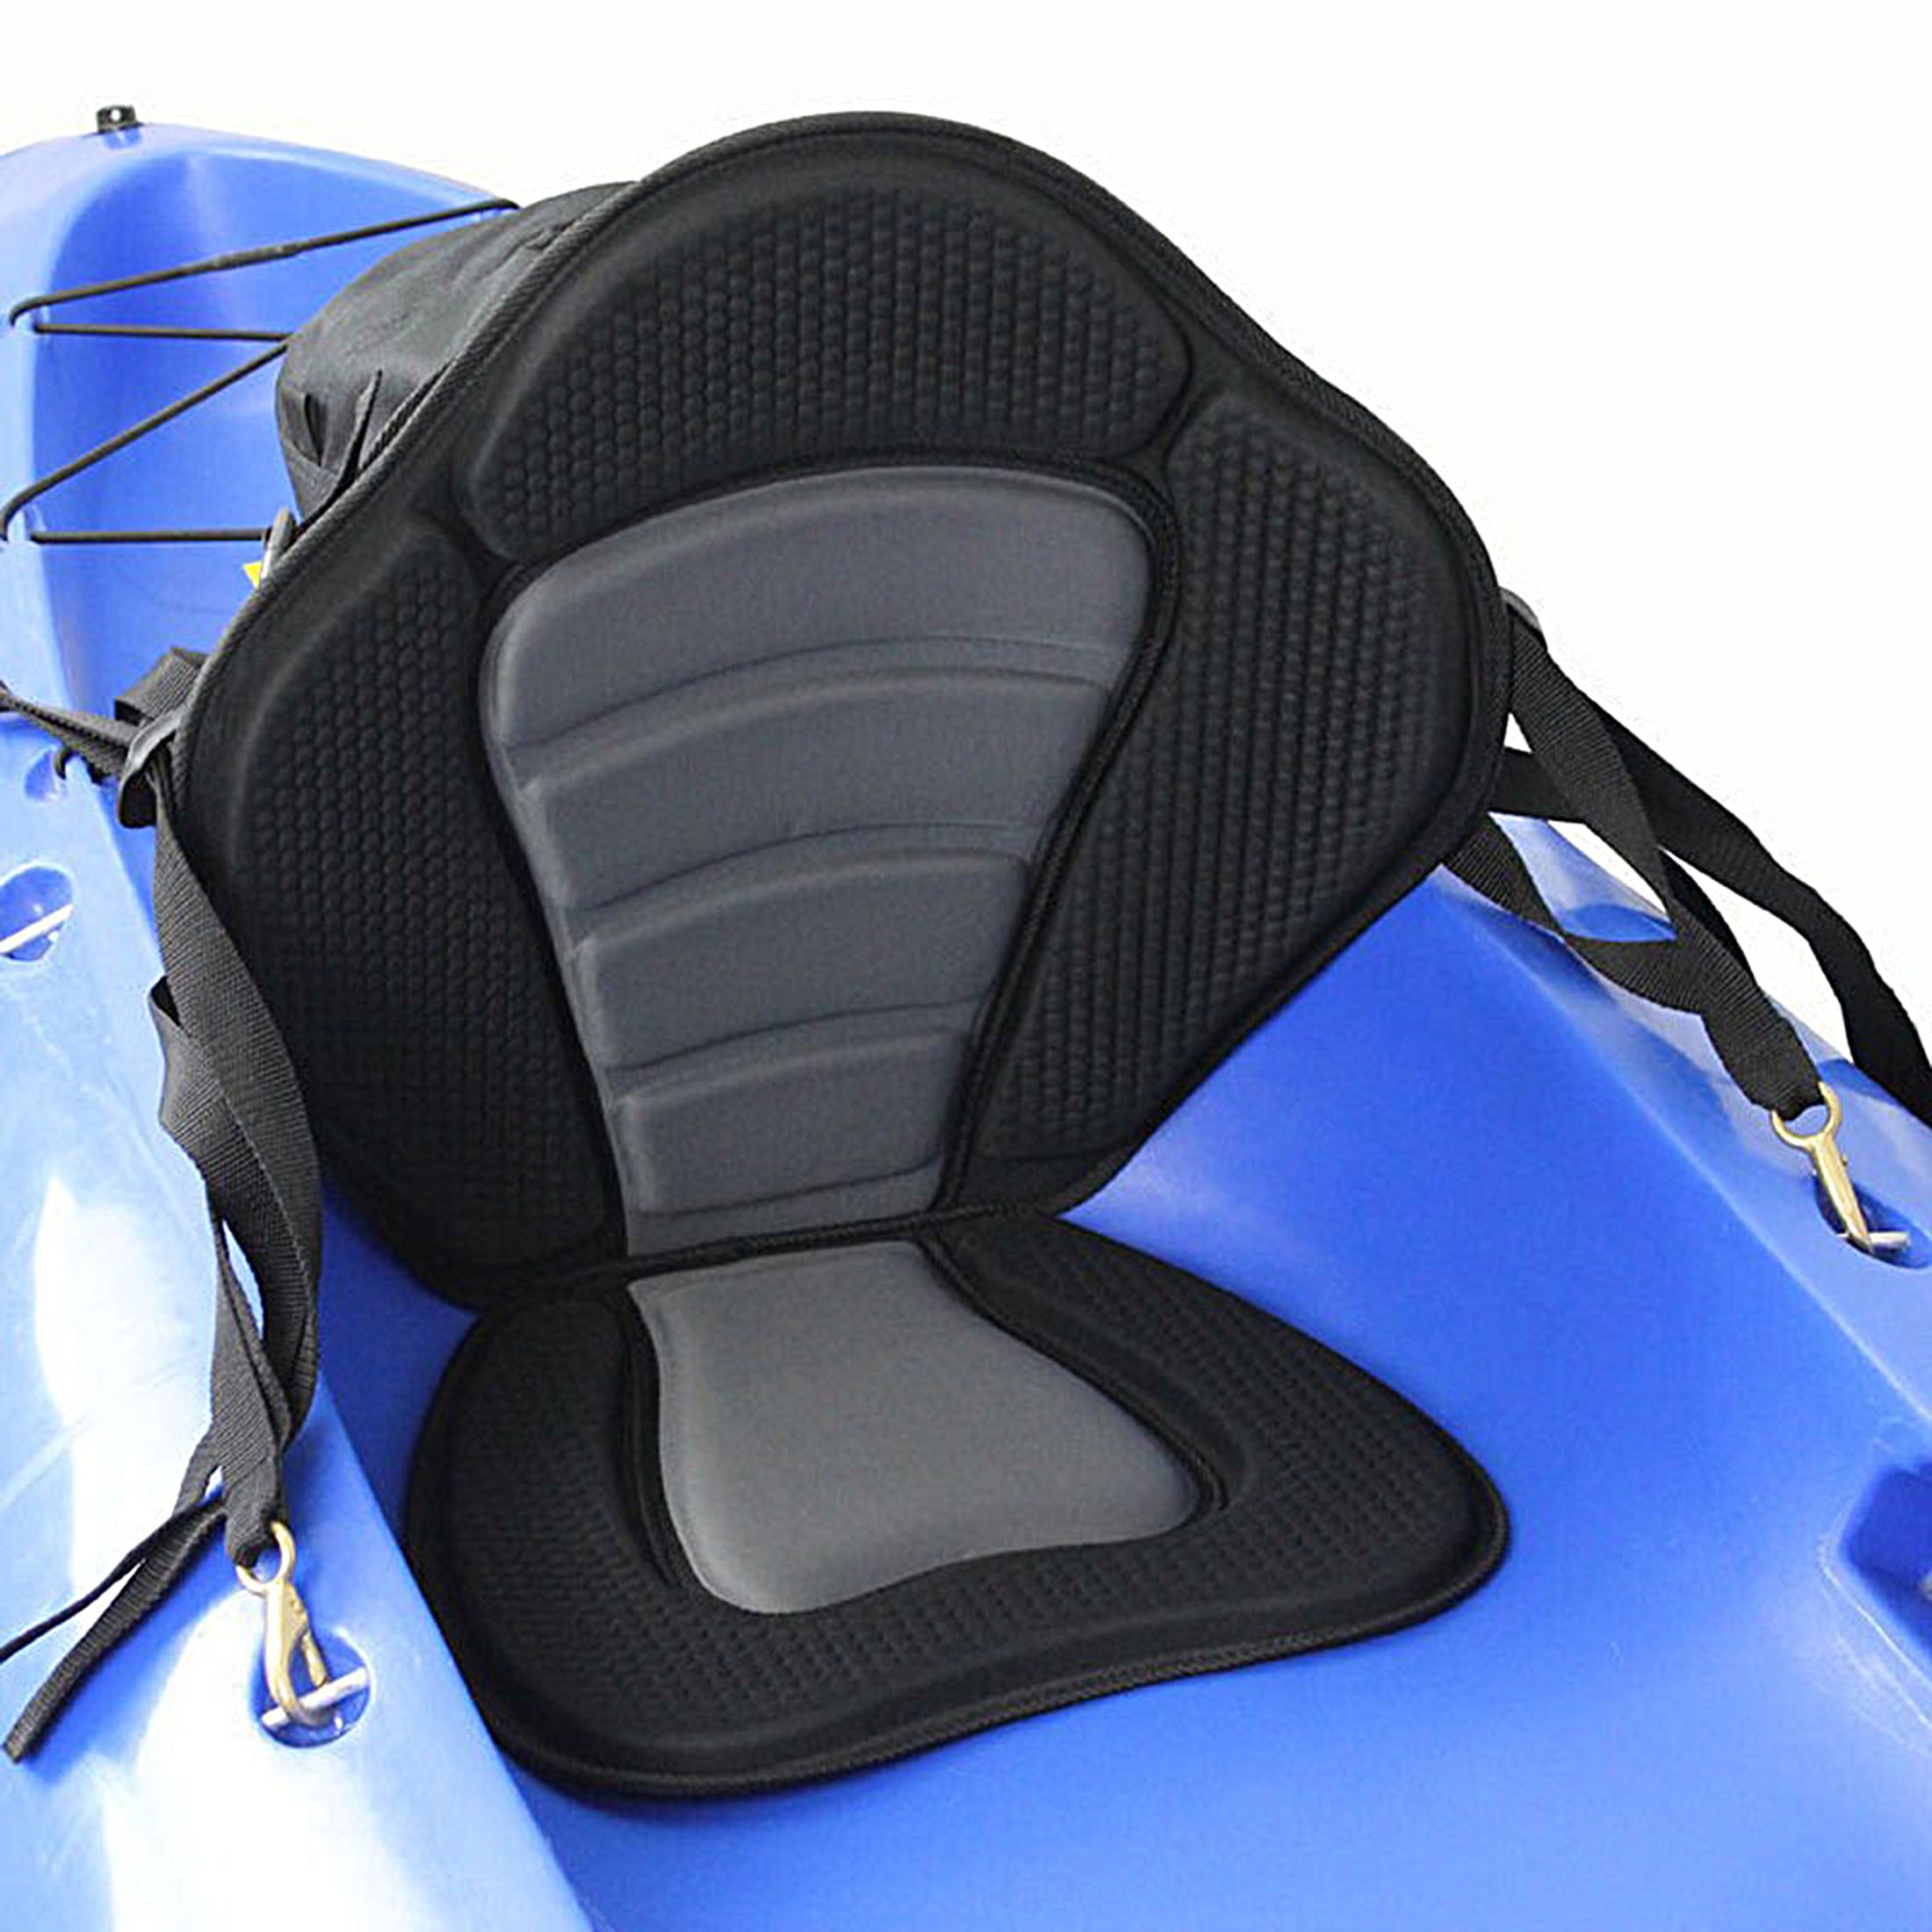 Kayak Adjustable Seat Detachable Deluxe Canoe Soft Seat Pad Only High Quality 